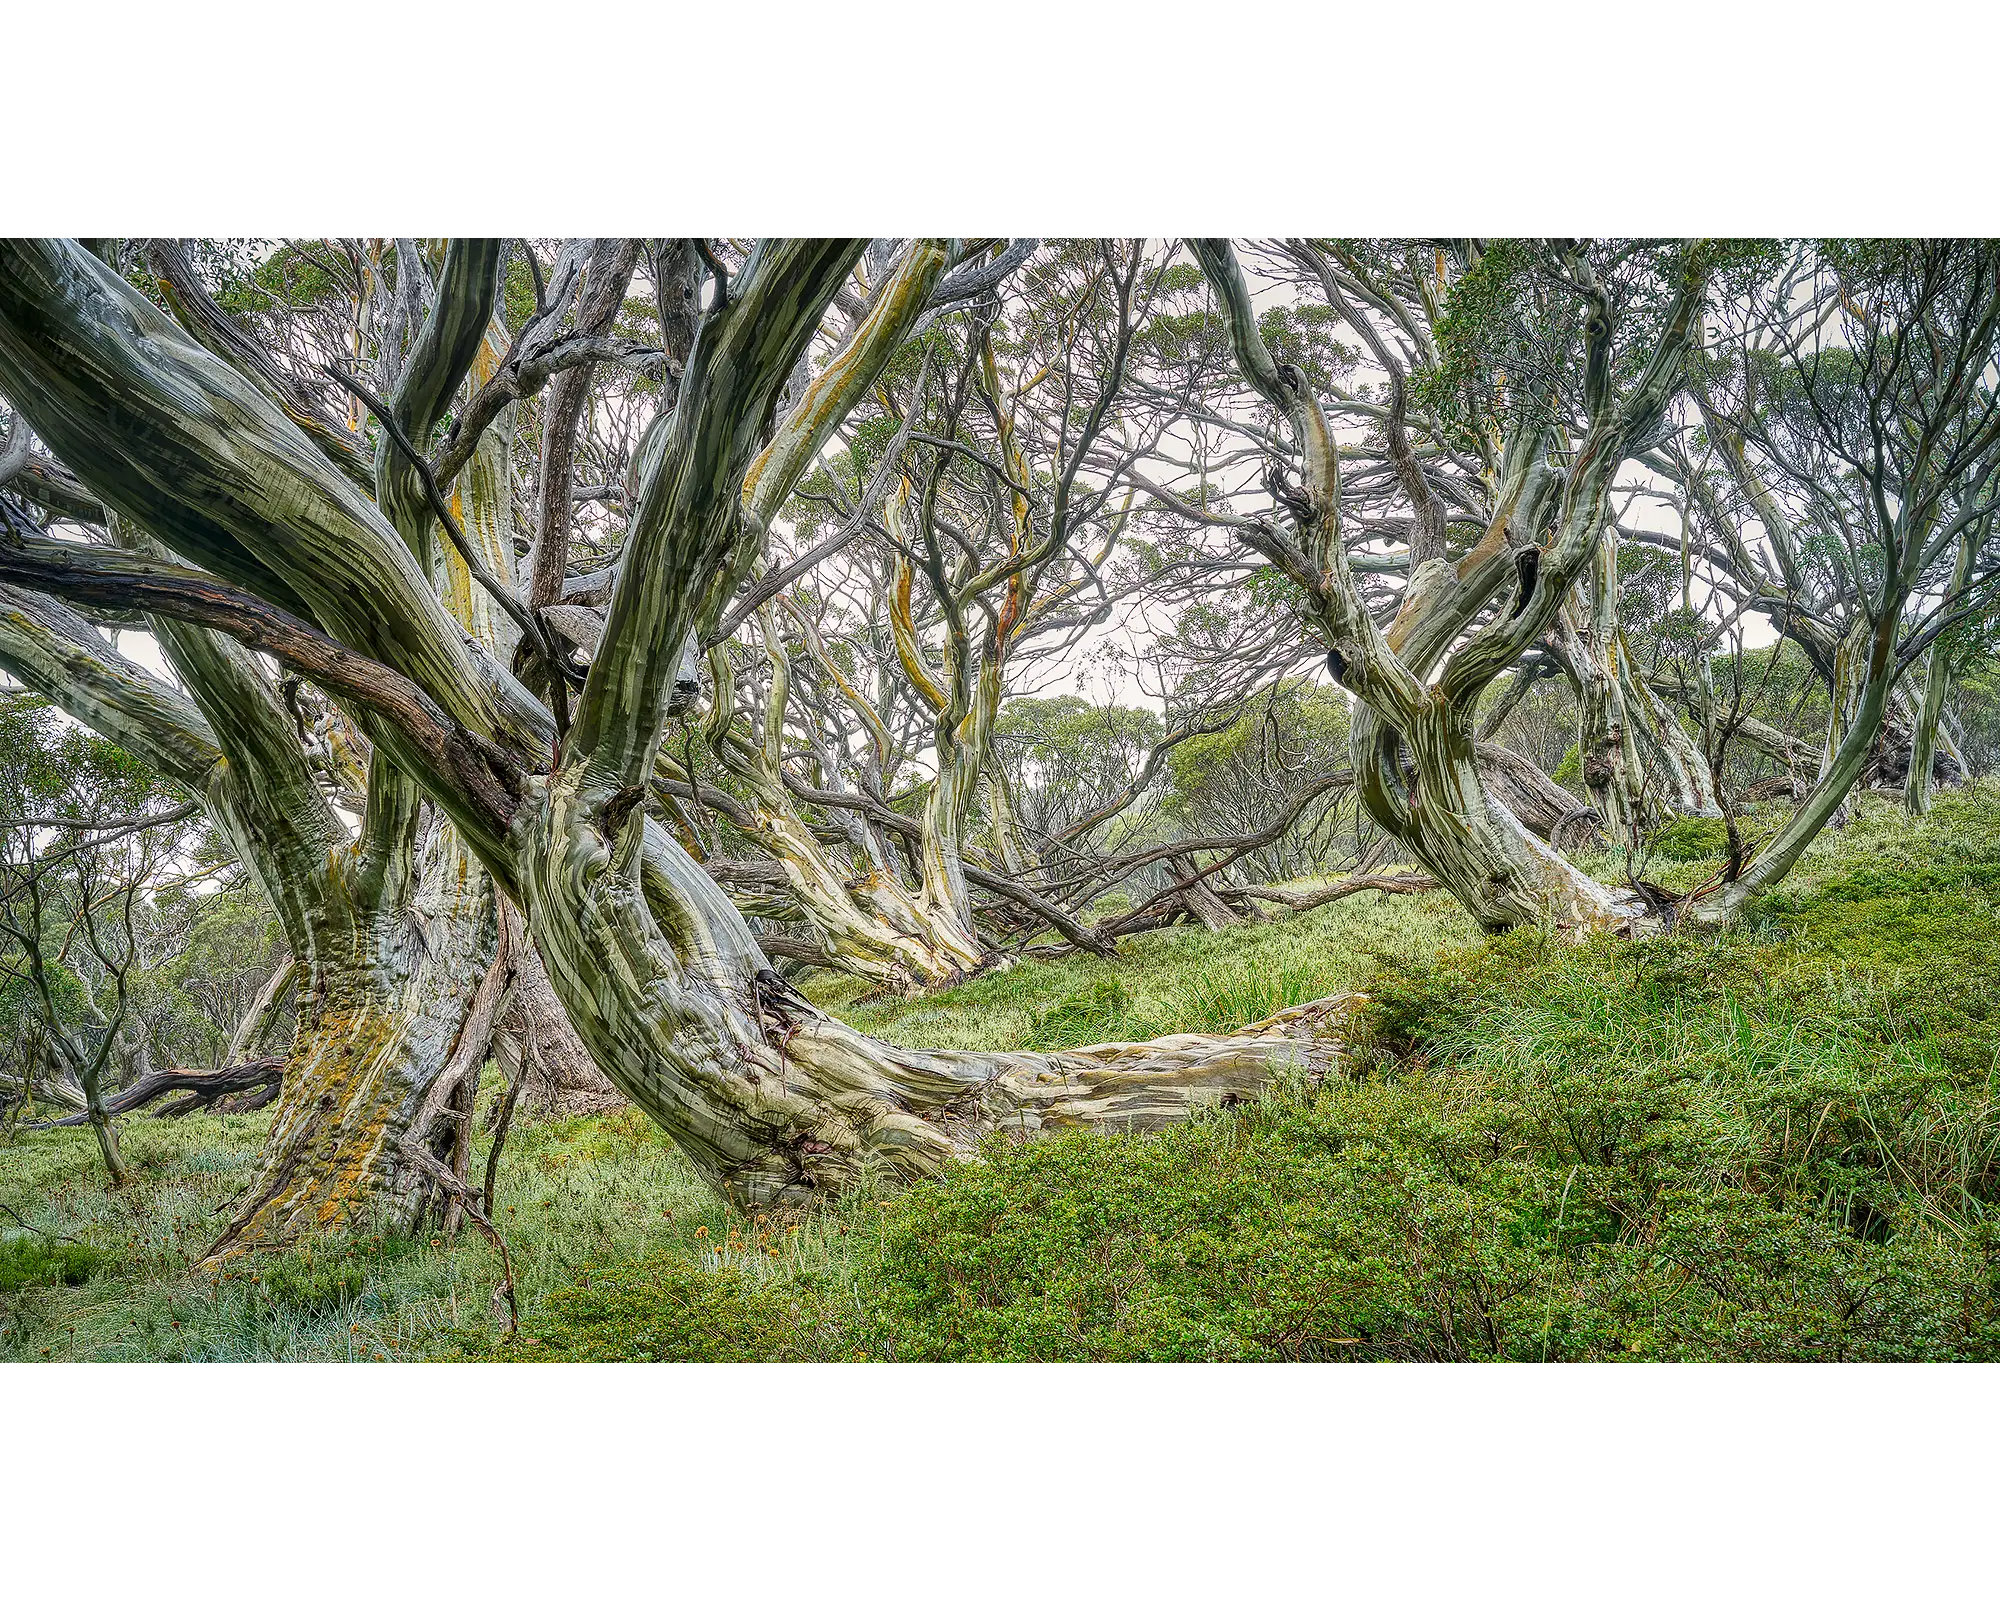 Robust. Snow gums in forest, Kosciuszko National Park, New South Wales, Australia.